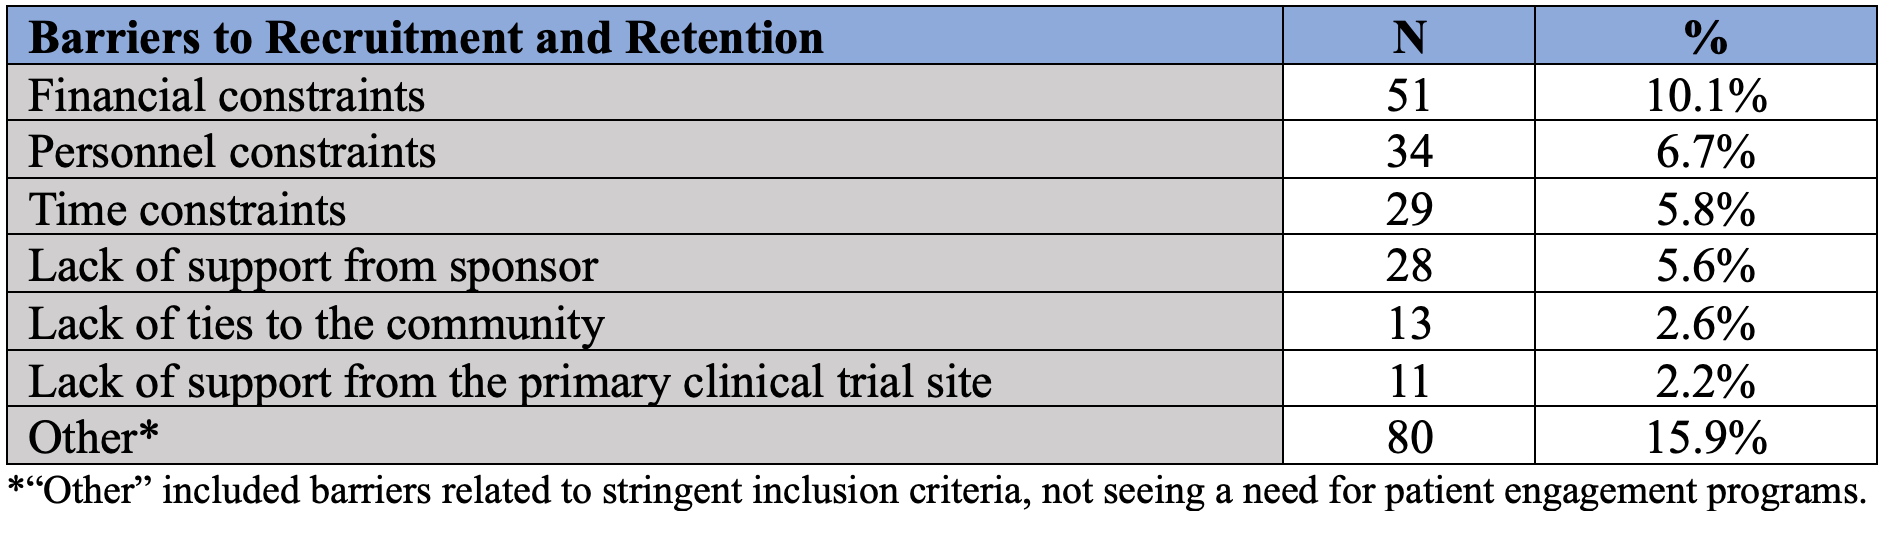 Table 2. Description of perceived barriers to recruitment and retention of patients by SES status